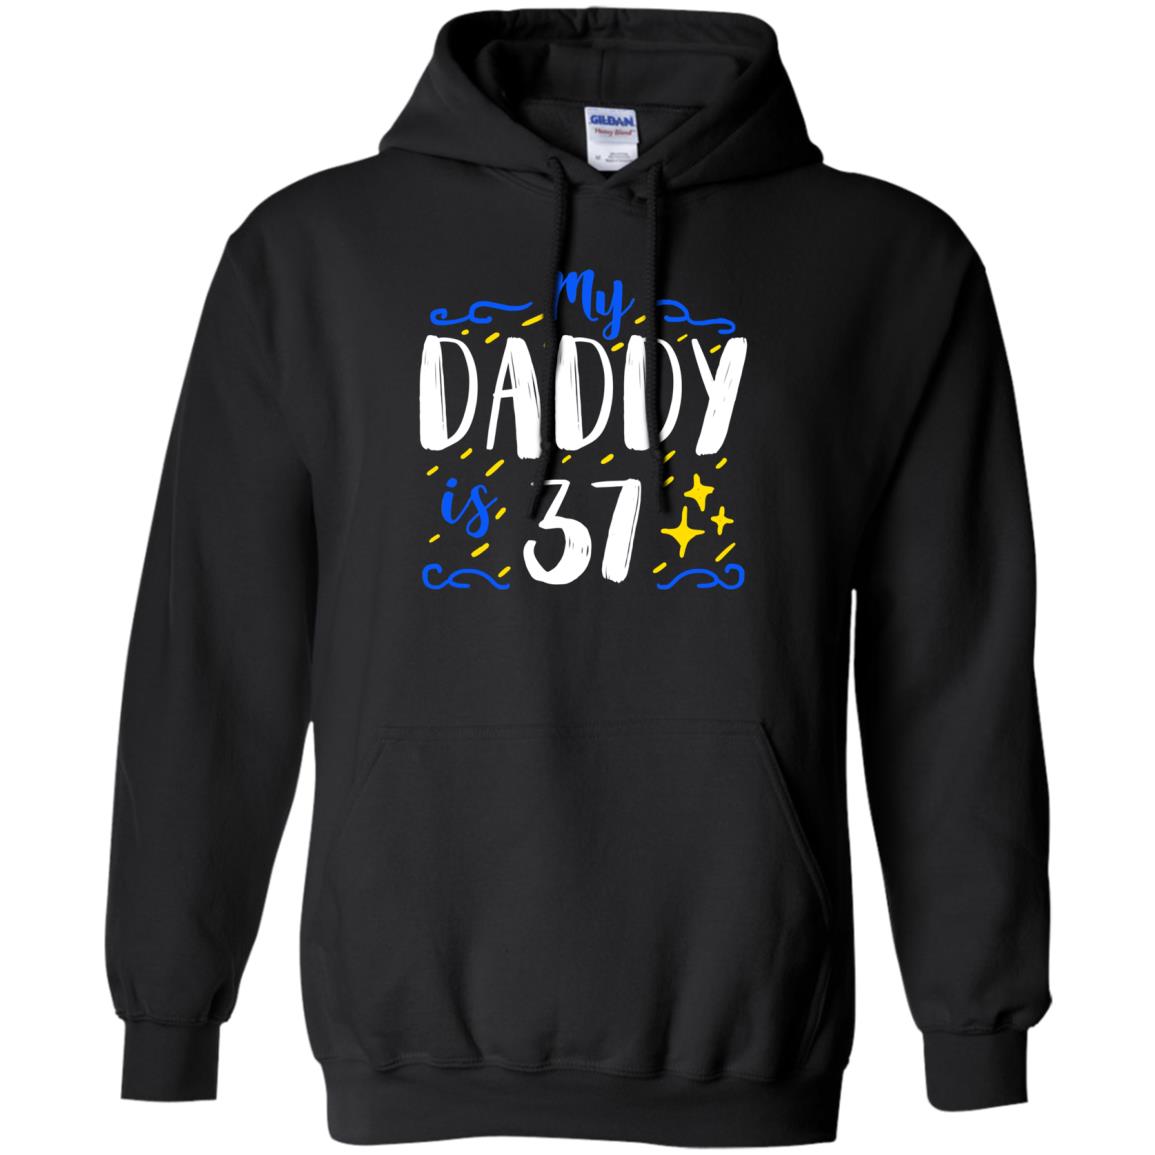 My Daddy Is 37 37th Birthday Daddy Shirt For Sons Or DaughtersG185 Gildan Pullover Hoodie 8 oz.